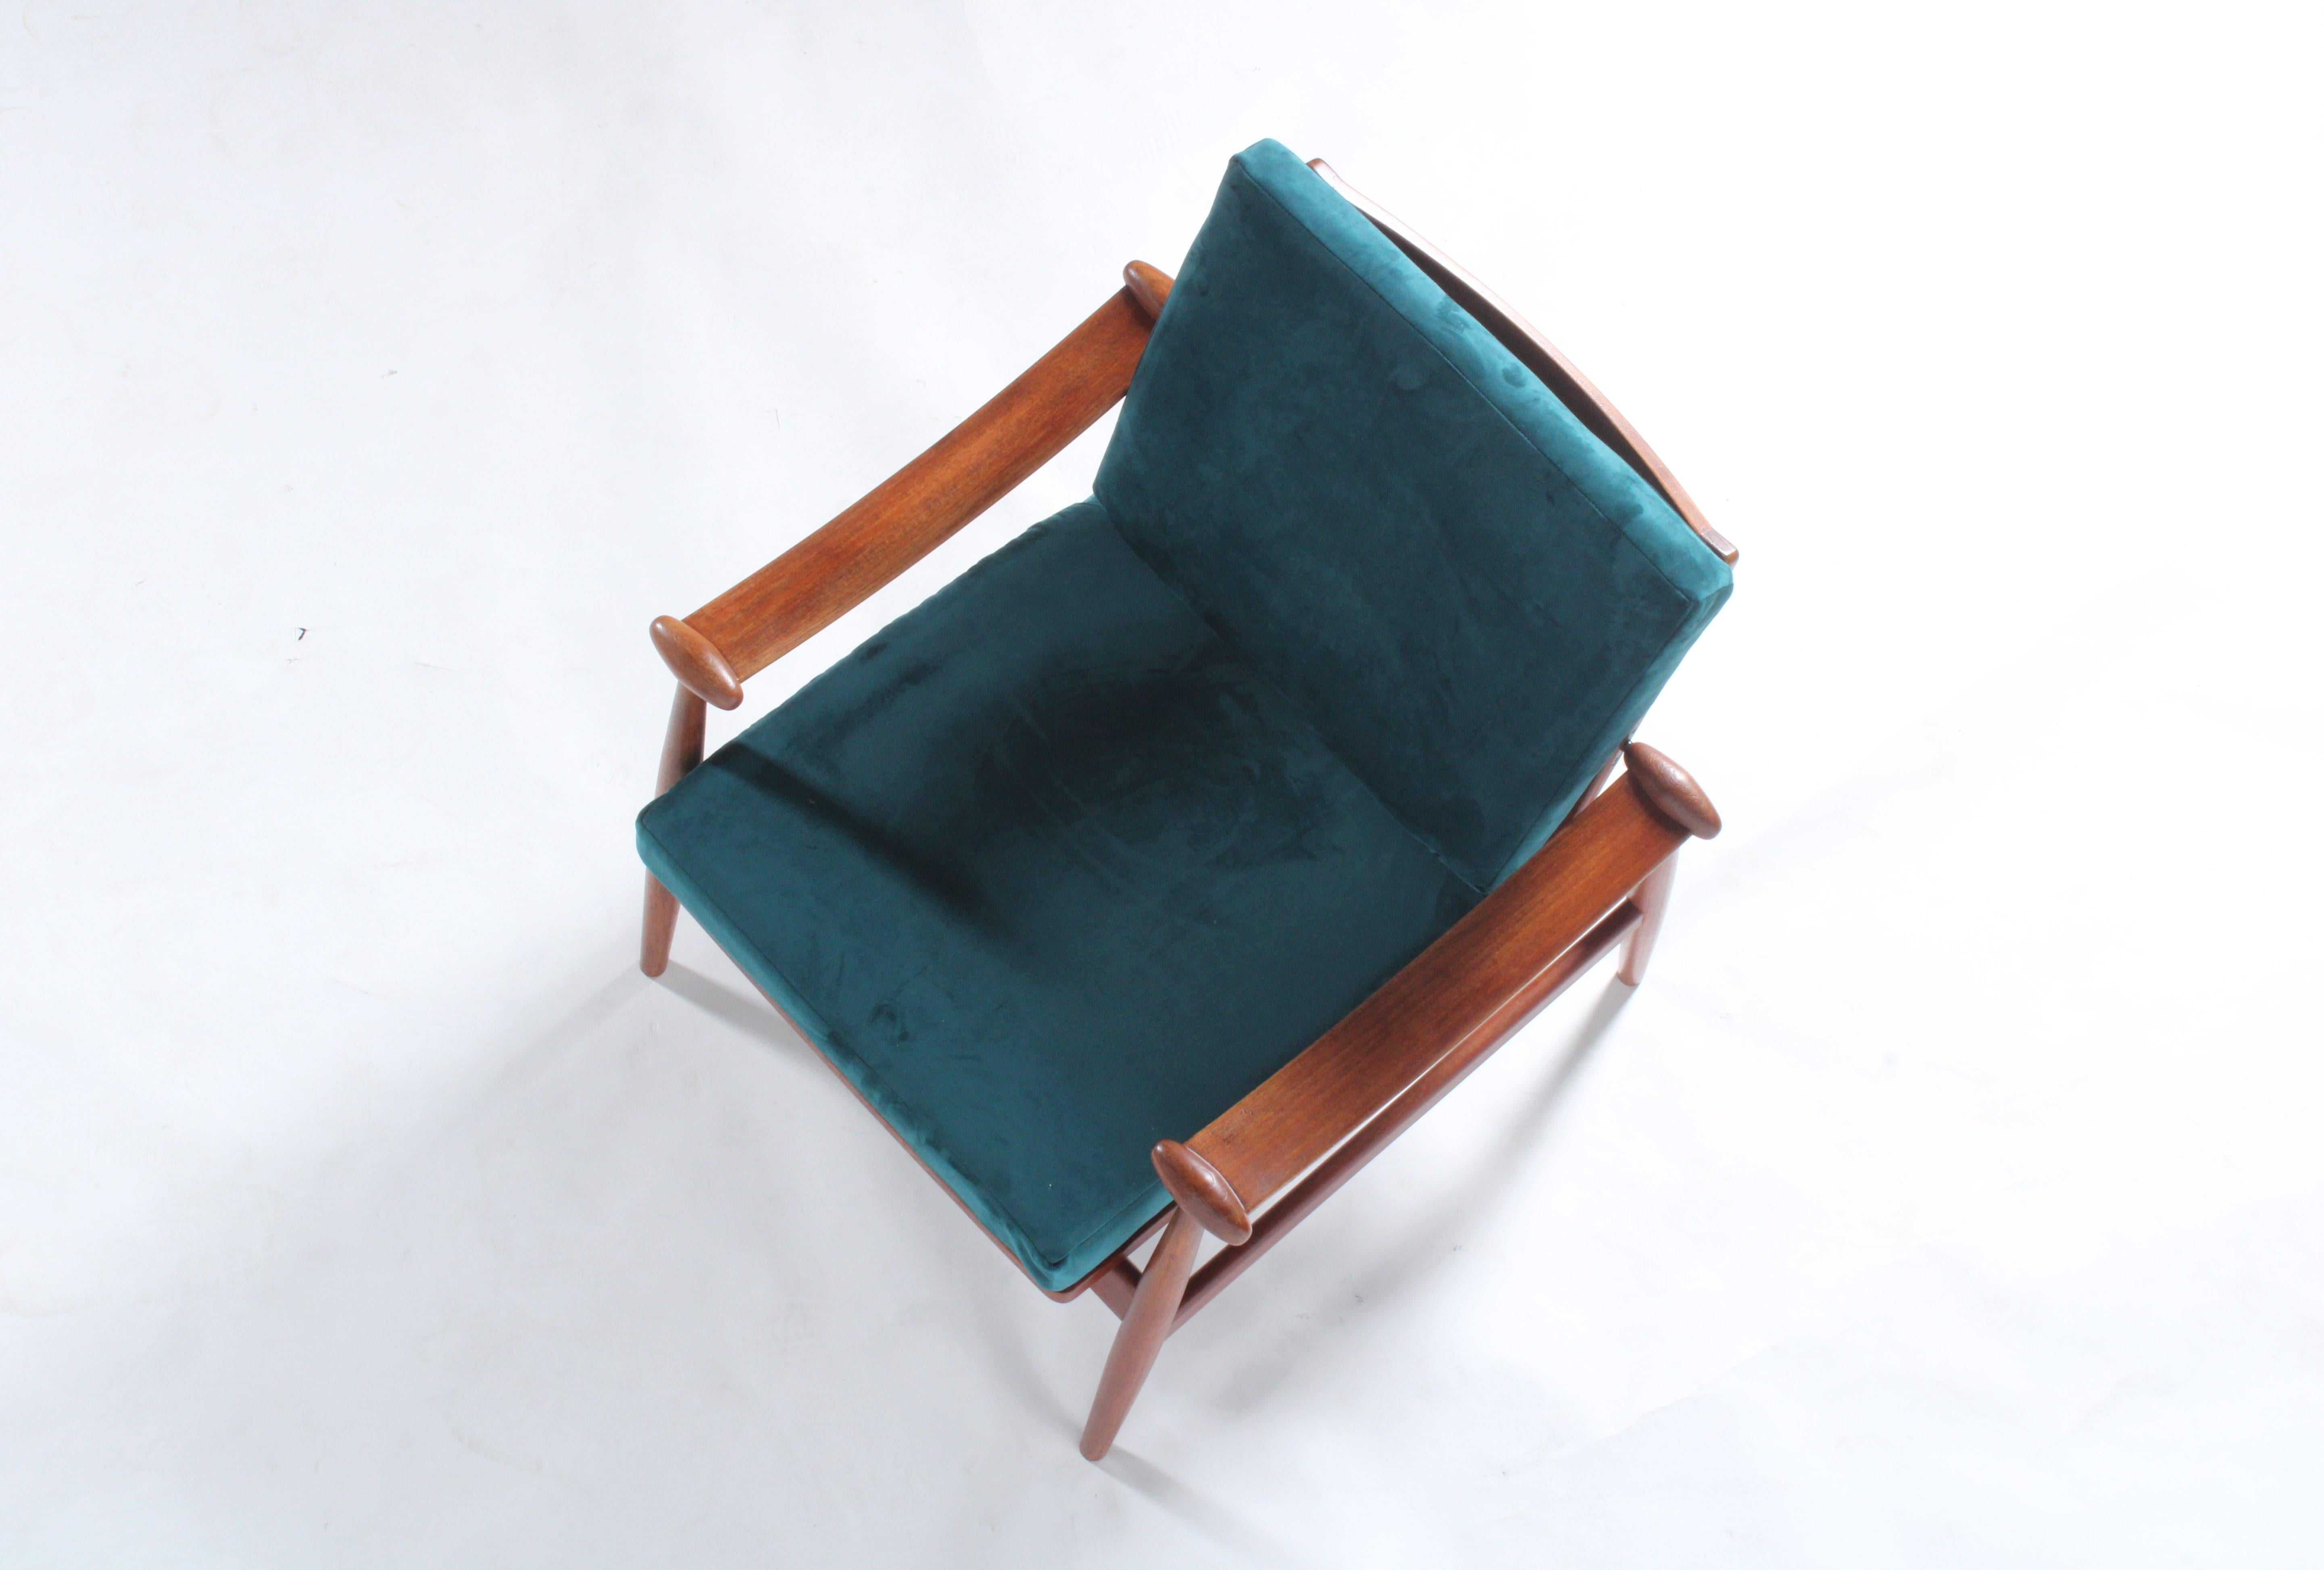 Exquisite Mid Century Danish Spade Chair By Finn Juhl For France & Son In Teak For Sale 7